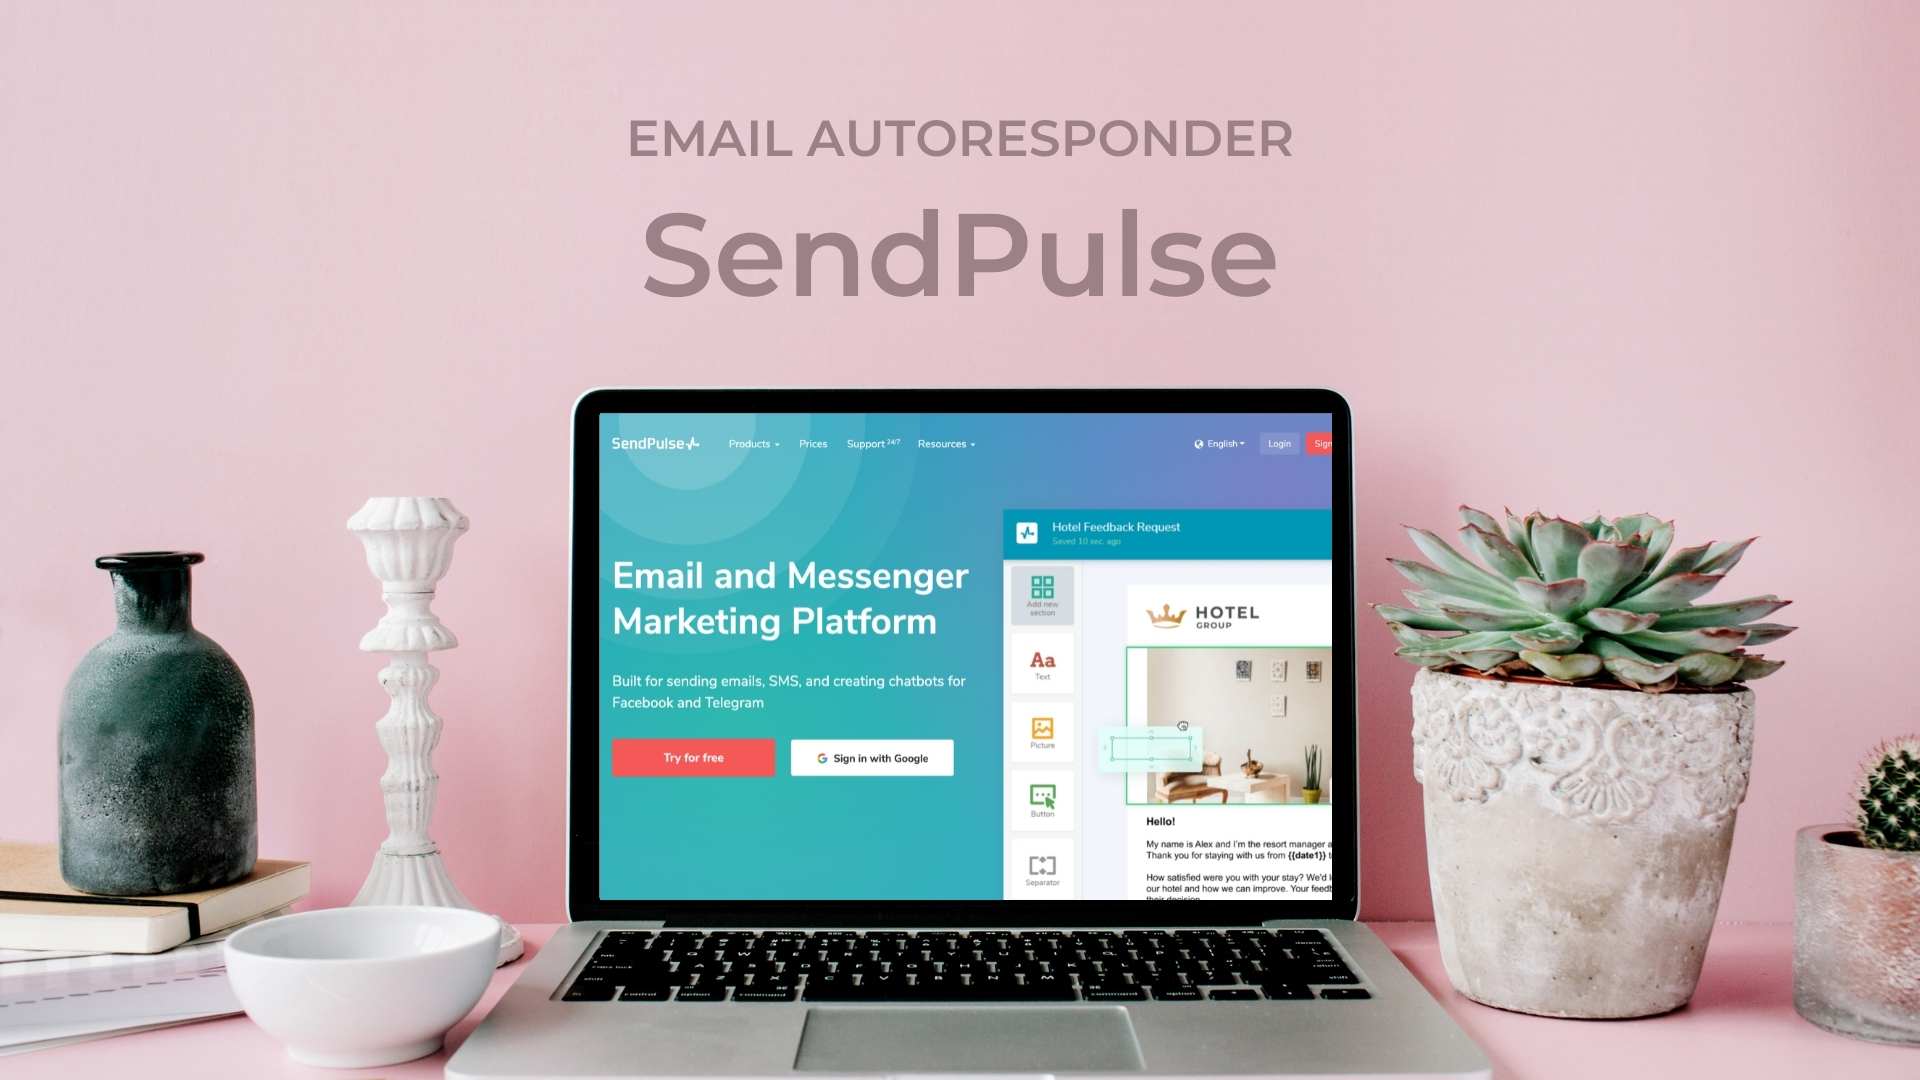 SendPulse Review Is this Email Autoresponder worth it? Features, Pro’s & Con’s